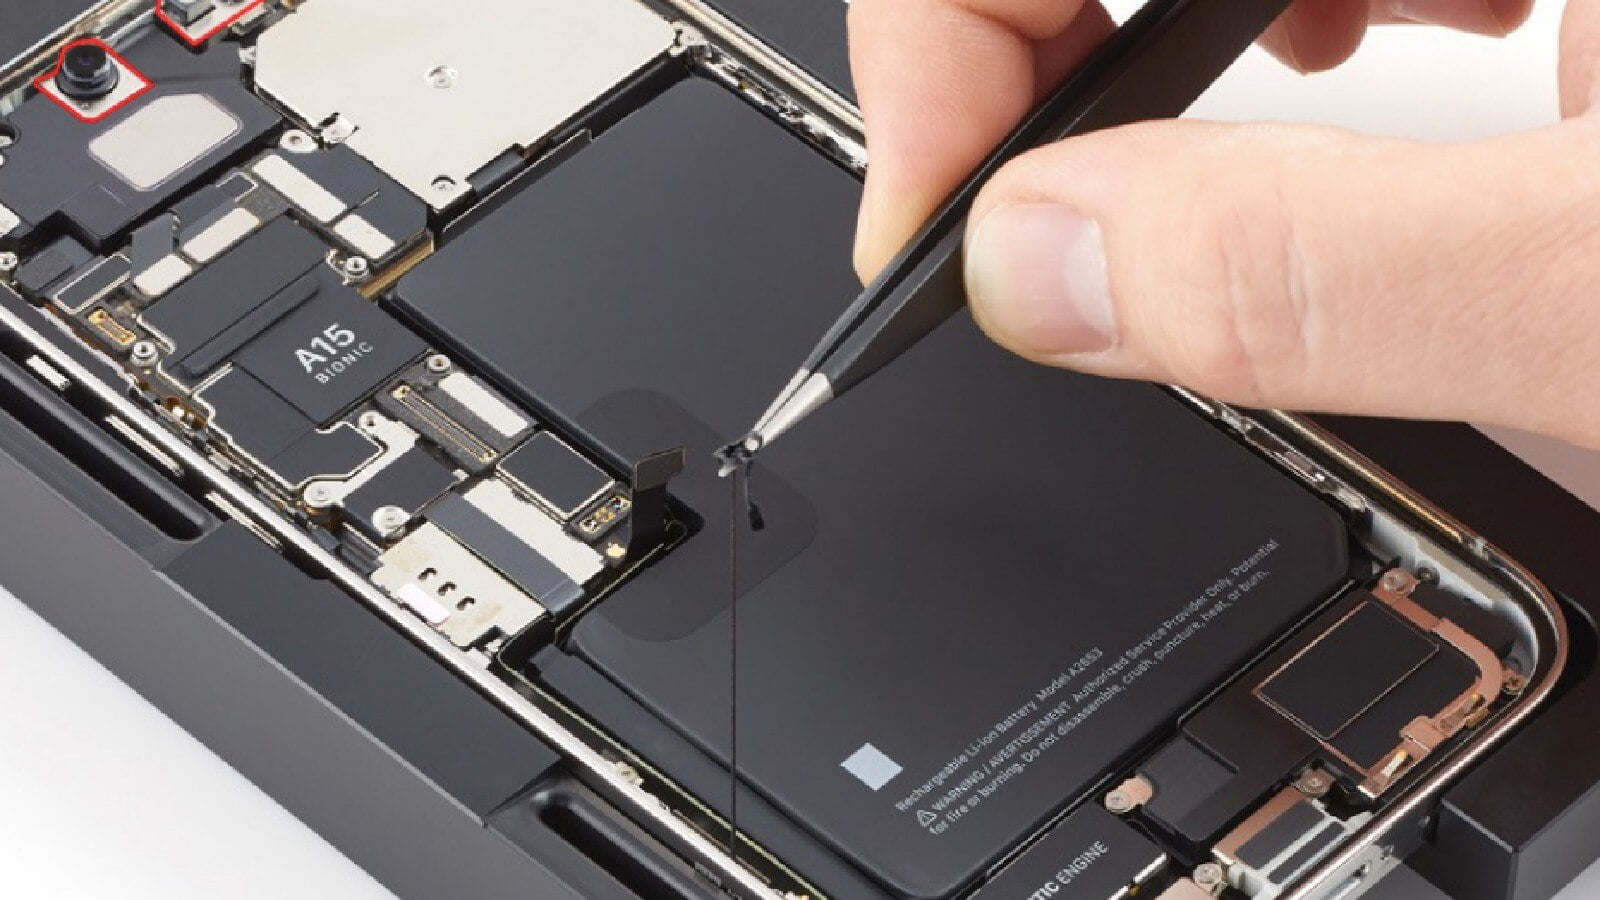 iPhone users can now repair their phone’s broken screen, damaged battery at home